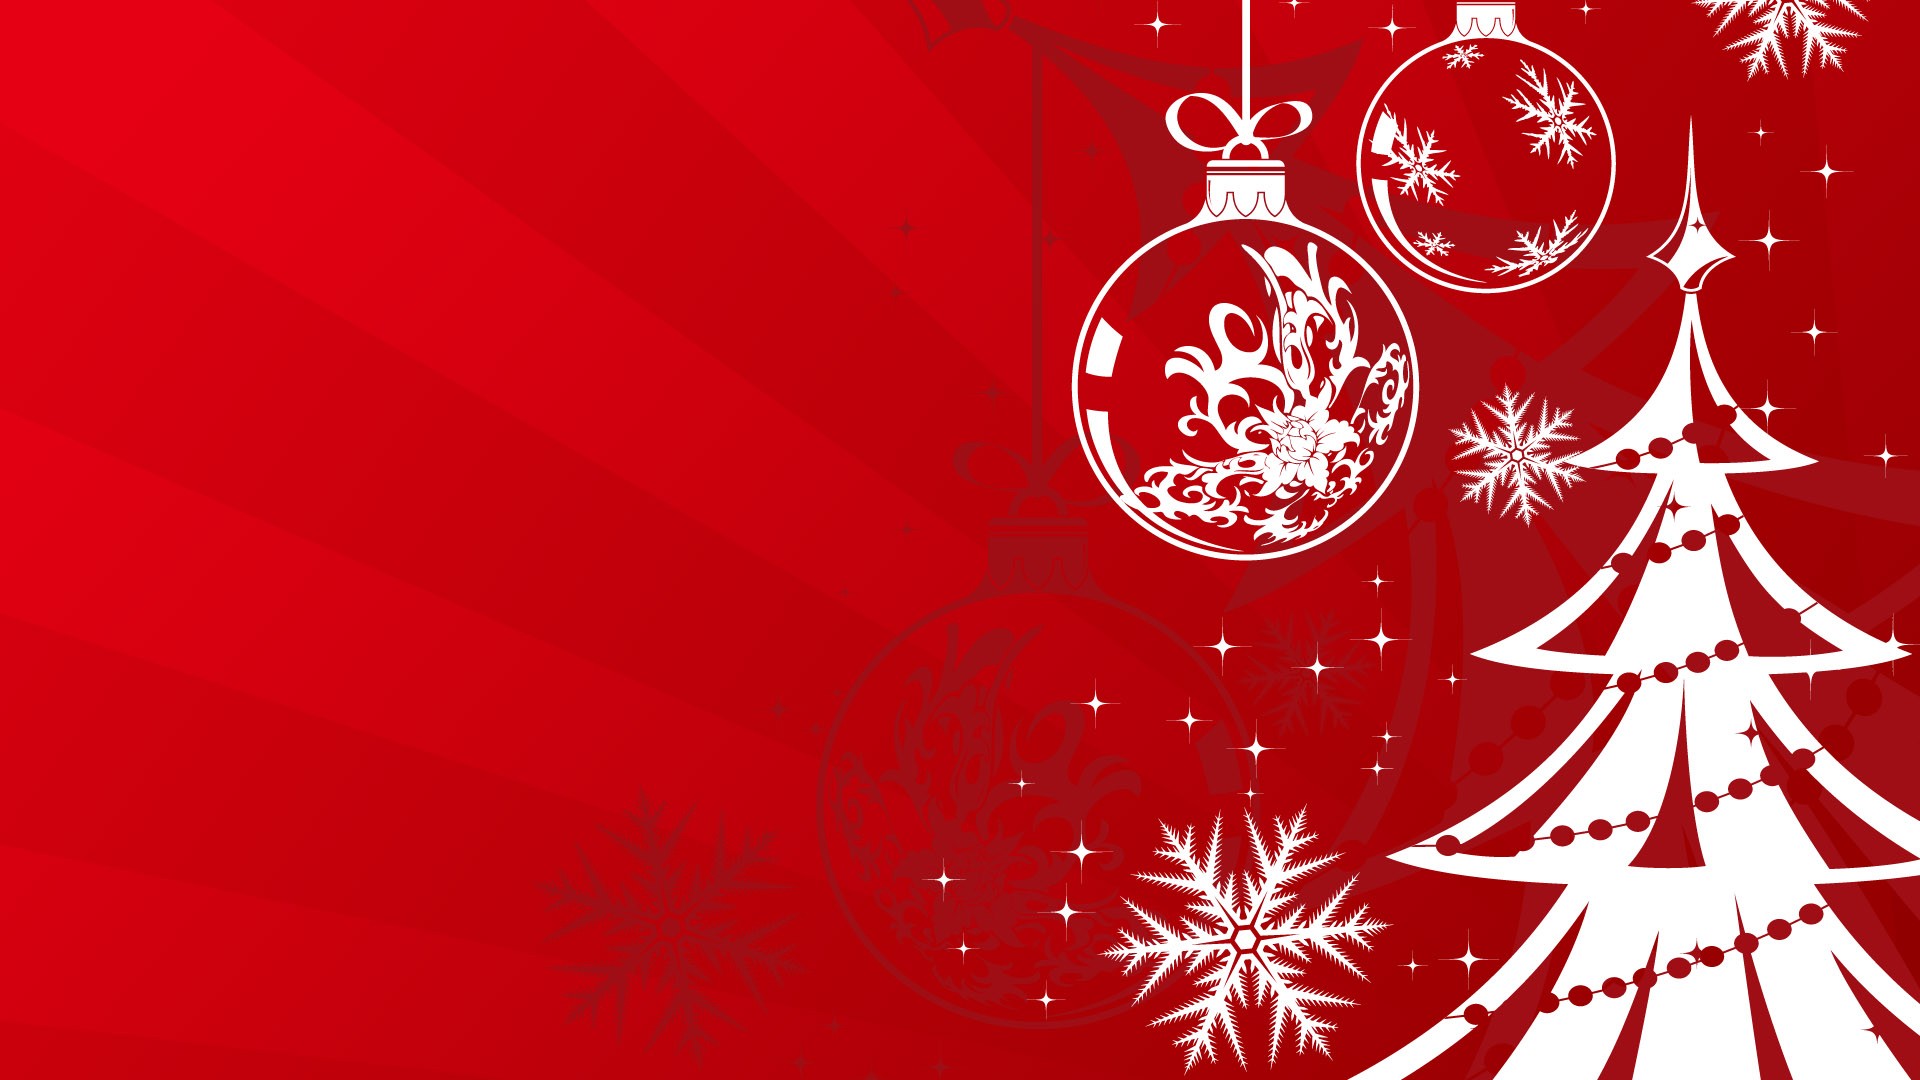 Exquisite Christmas Theme Hd Wallpapers - Christmas Wallpaper Red And White - HD Wallpaper 